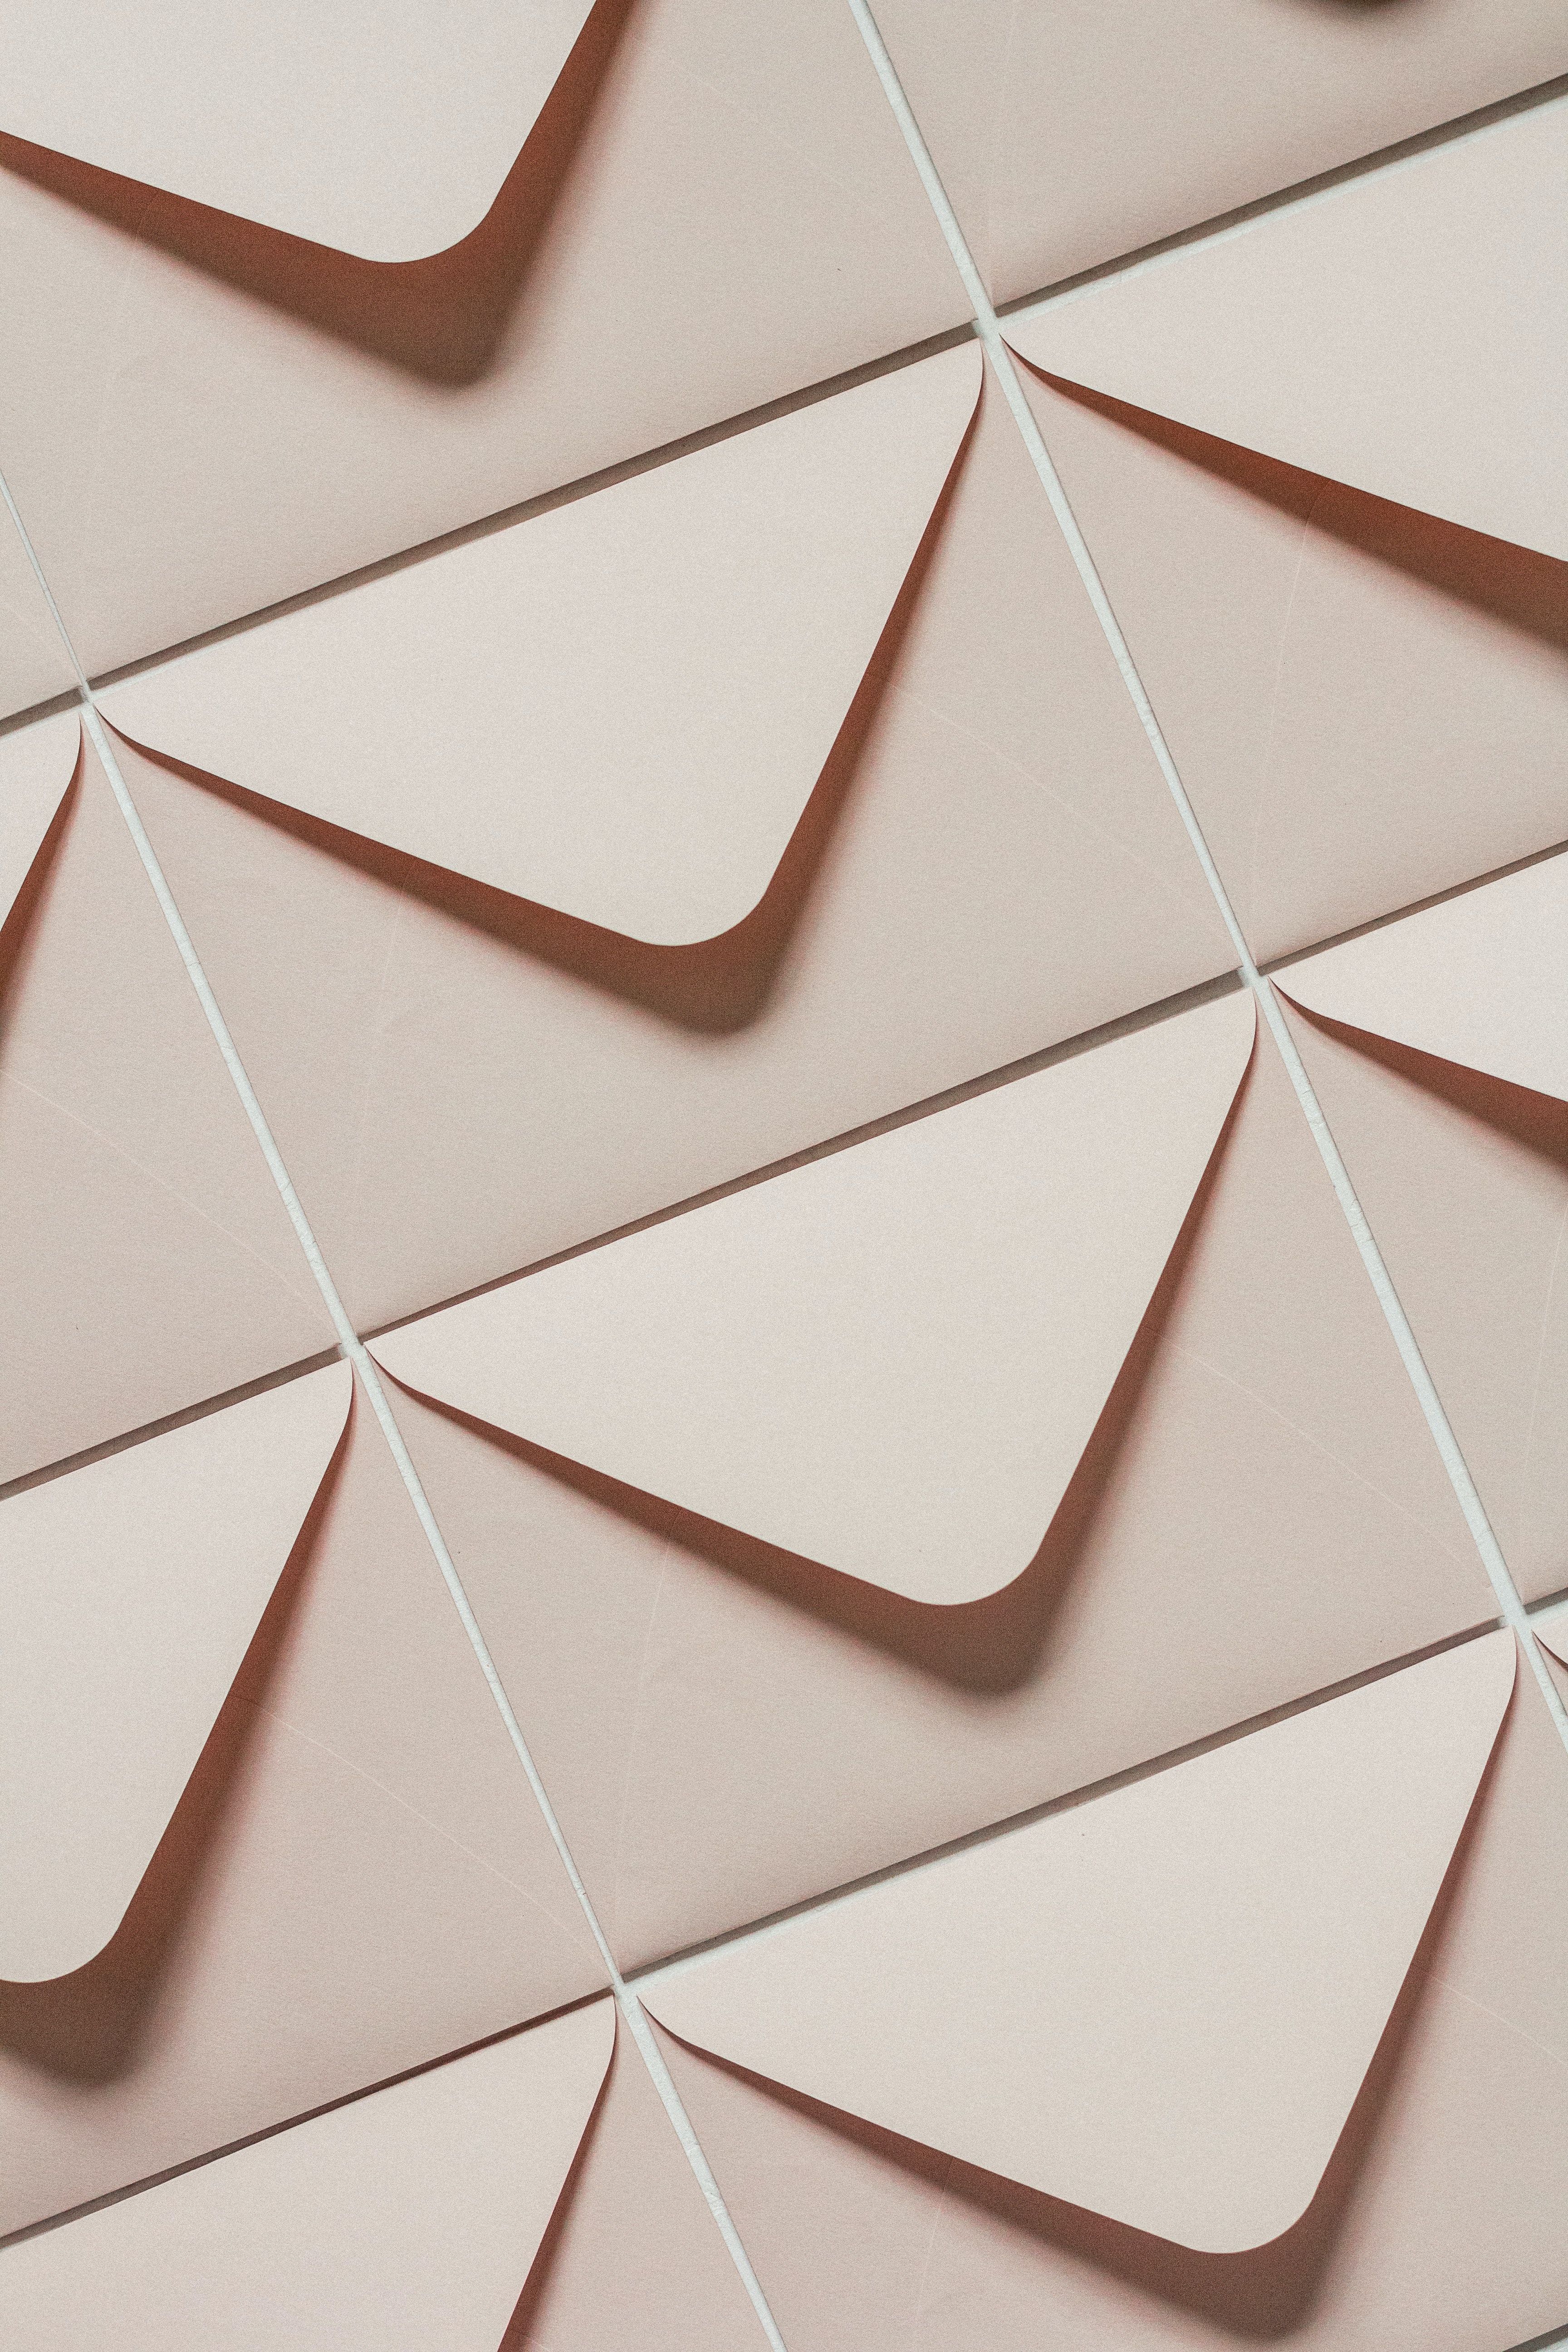 A close up of envelopes on the wall - Beige